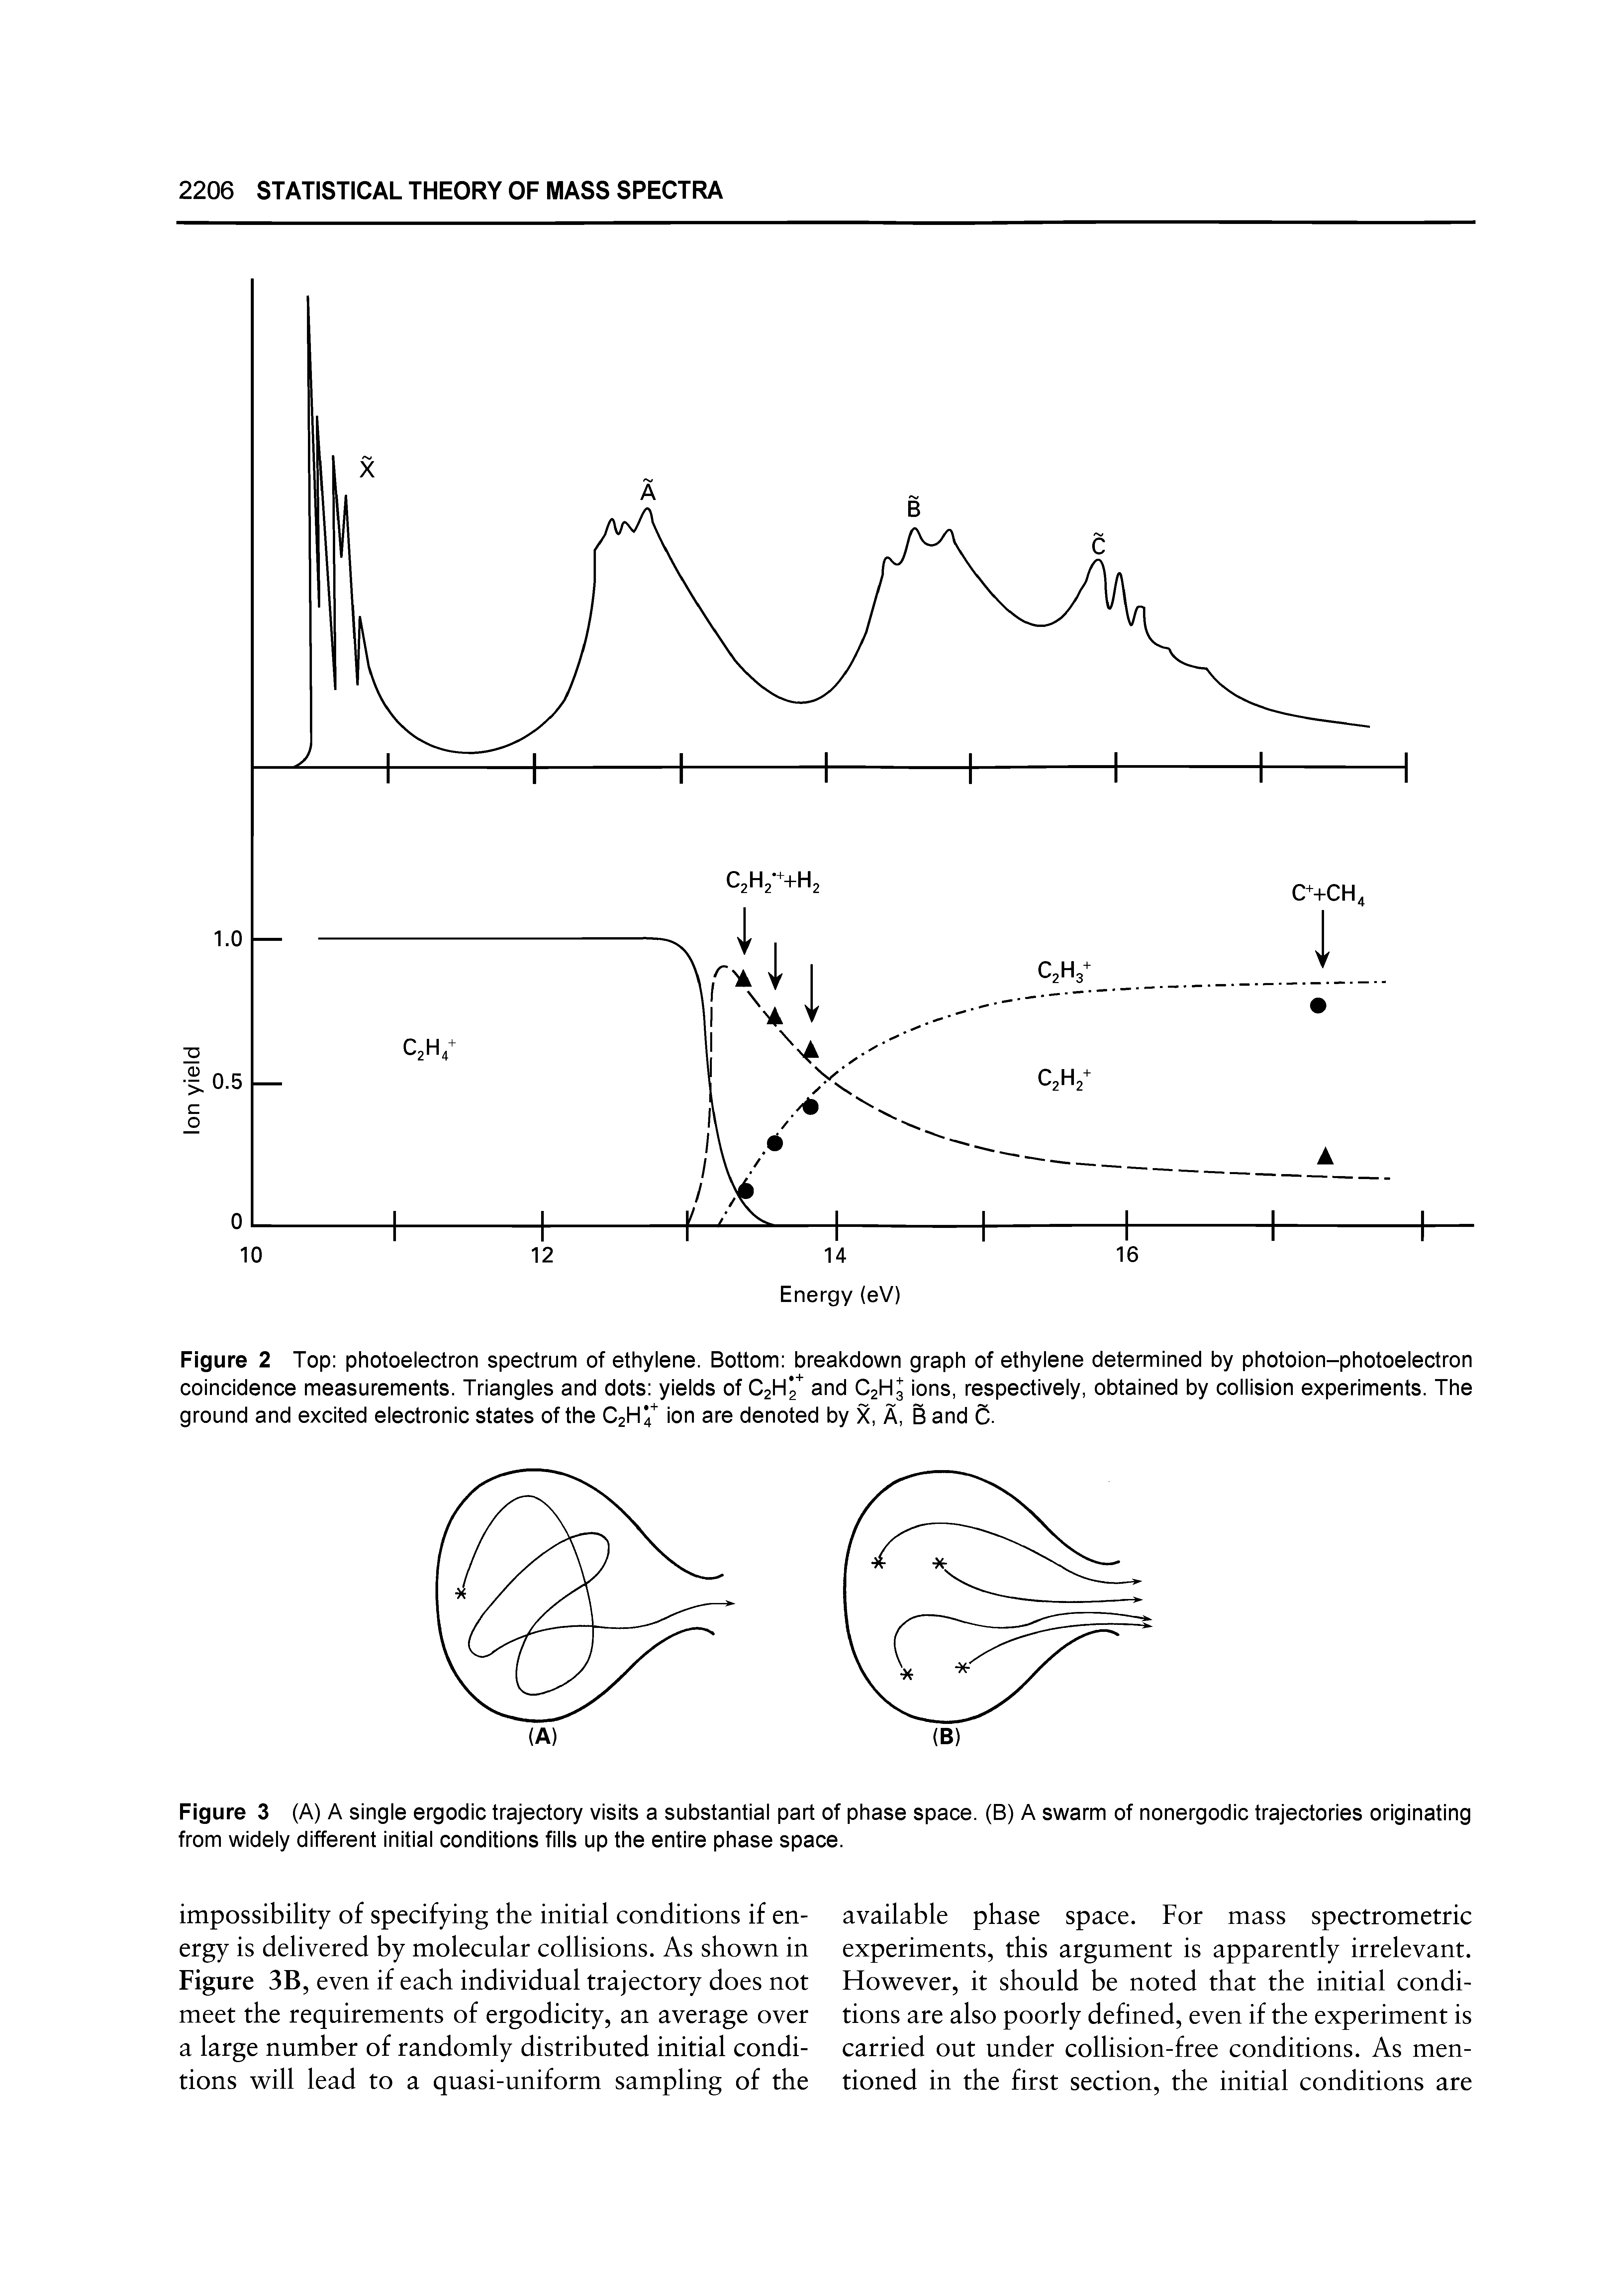 Figure 2 Top photoelectron spectrum of ethylene. Bottom breakdown graph of ethylene determined by photoion-photoelectron coincidence measurements. Triangles and dots yields of C2H2" and C2H3 ions, respectively, obtained by collision experiments. The ground and excited electronic states of the C2H4 ion are denoted by X, A, B and C.